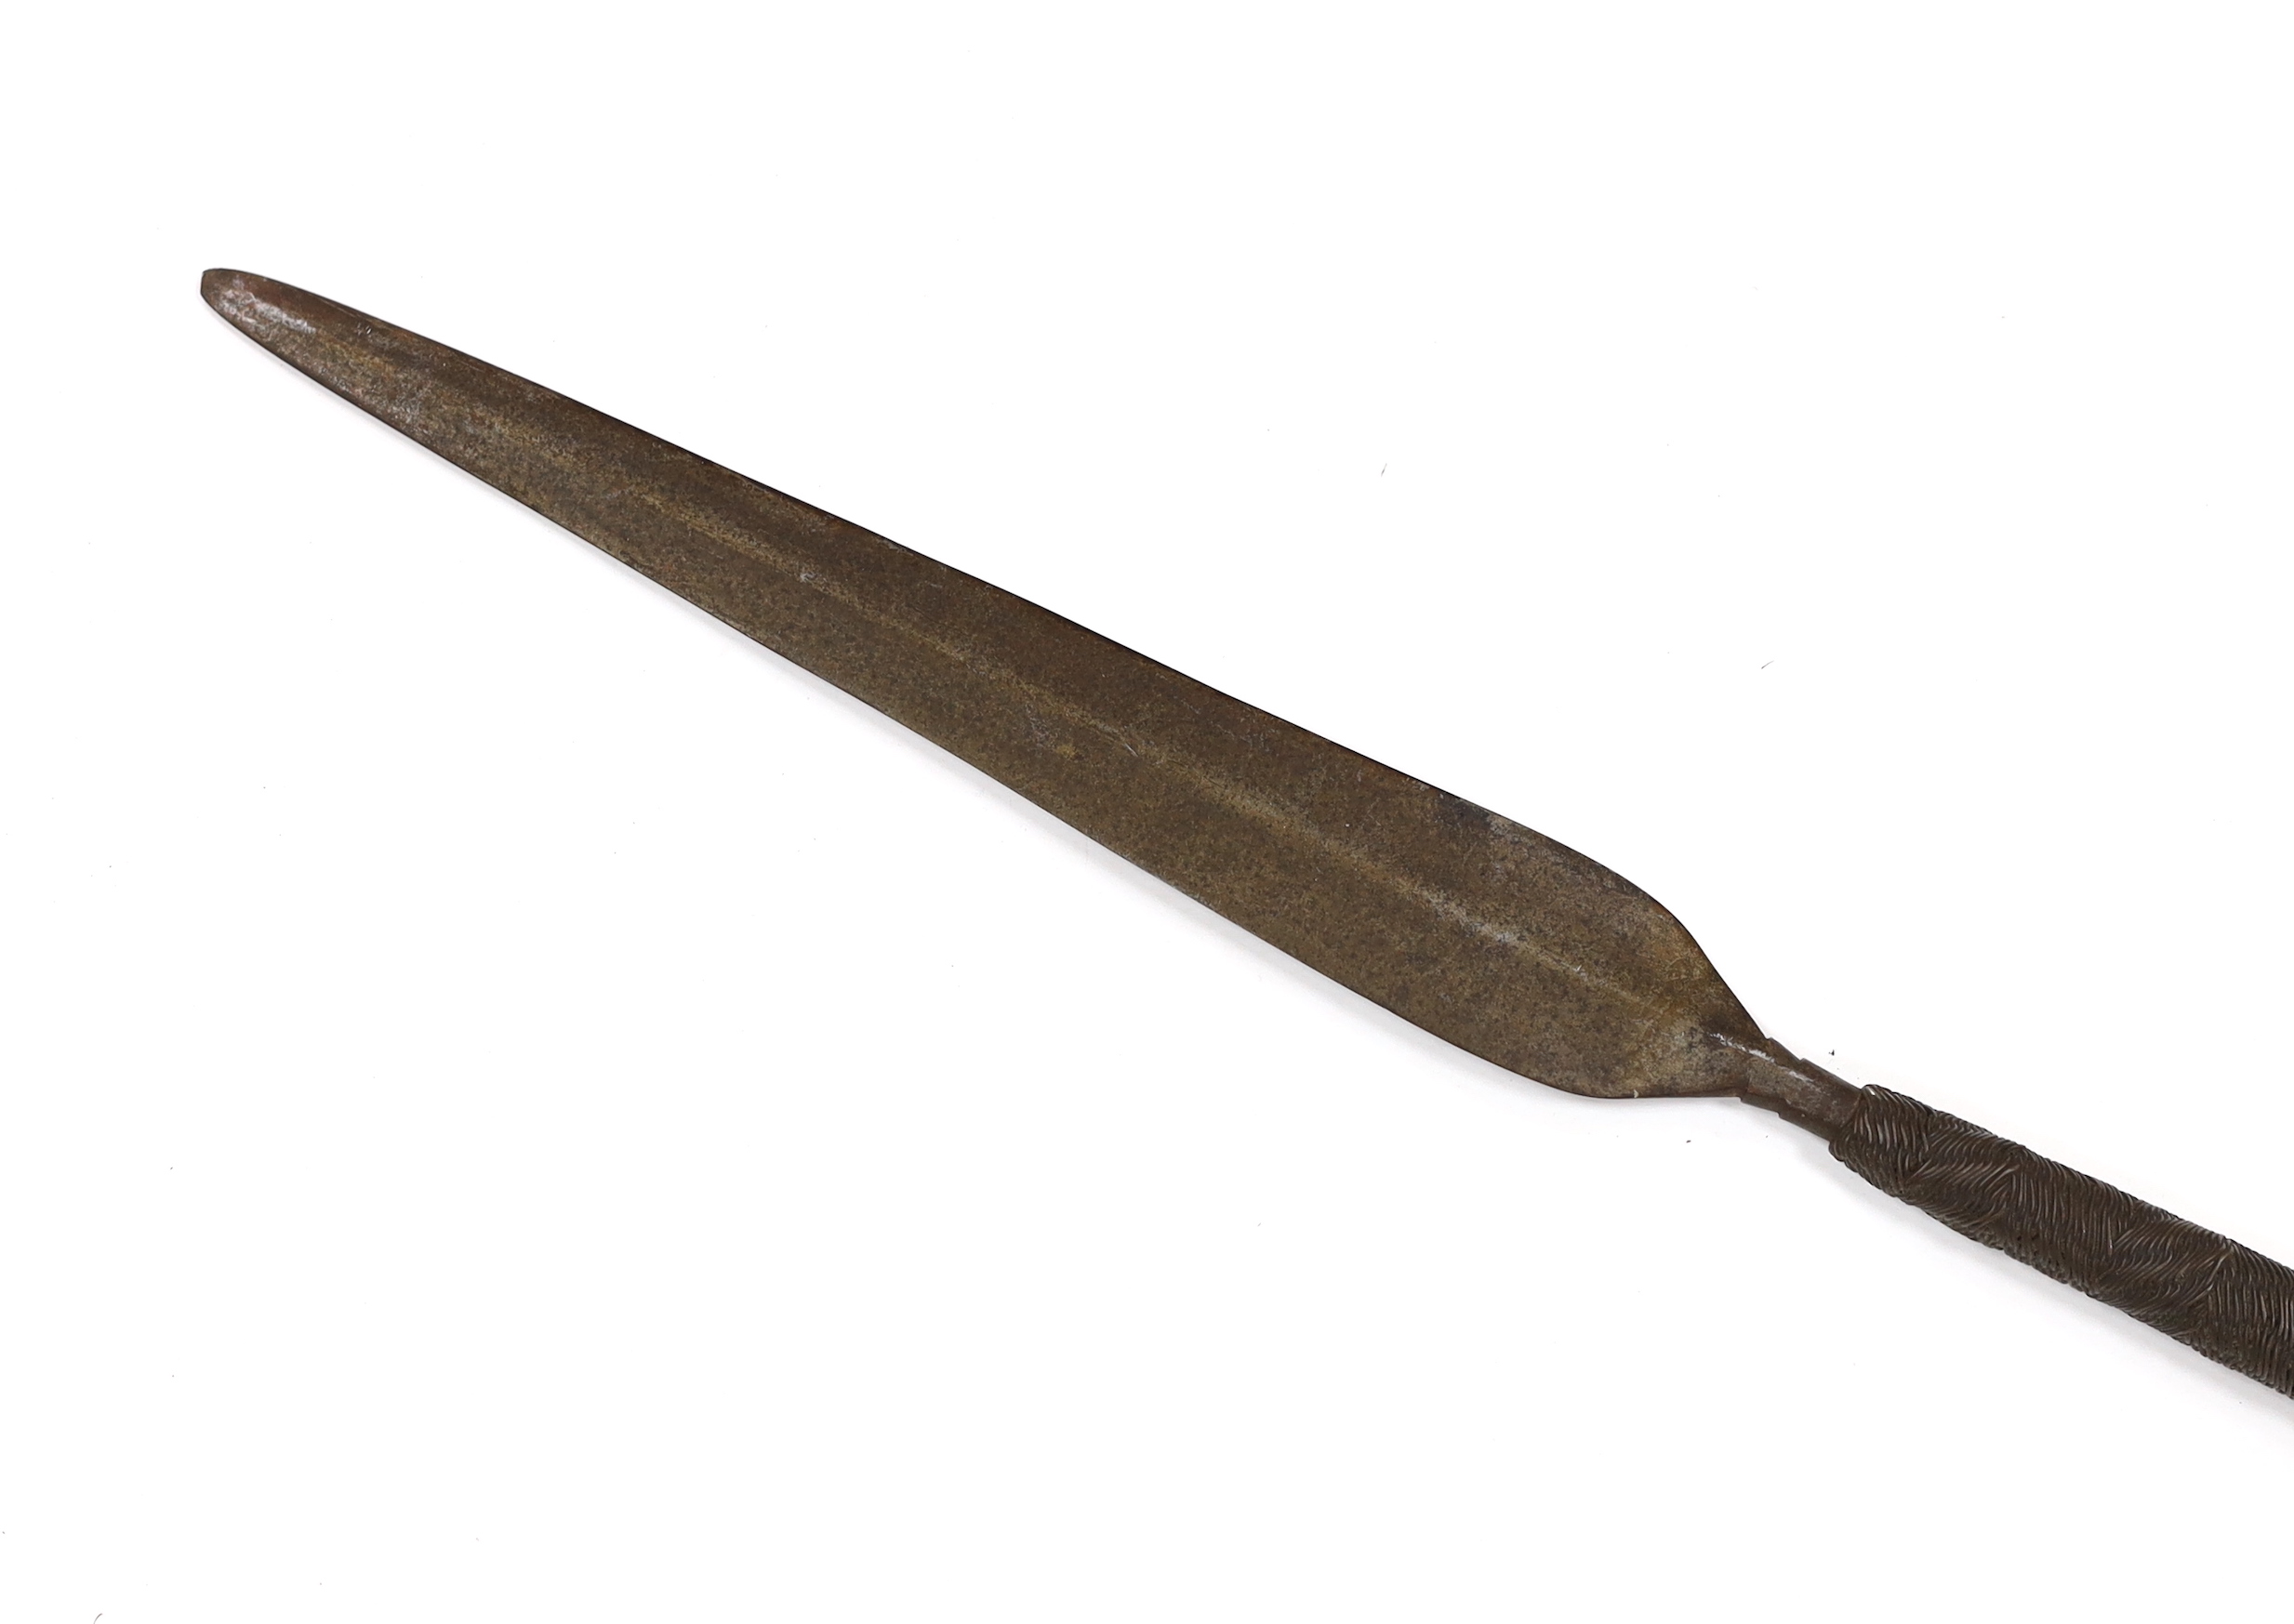 An African spear with wire grip, length 92.5cm